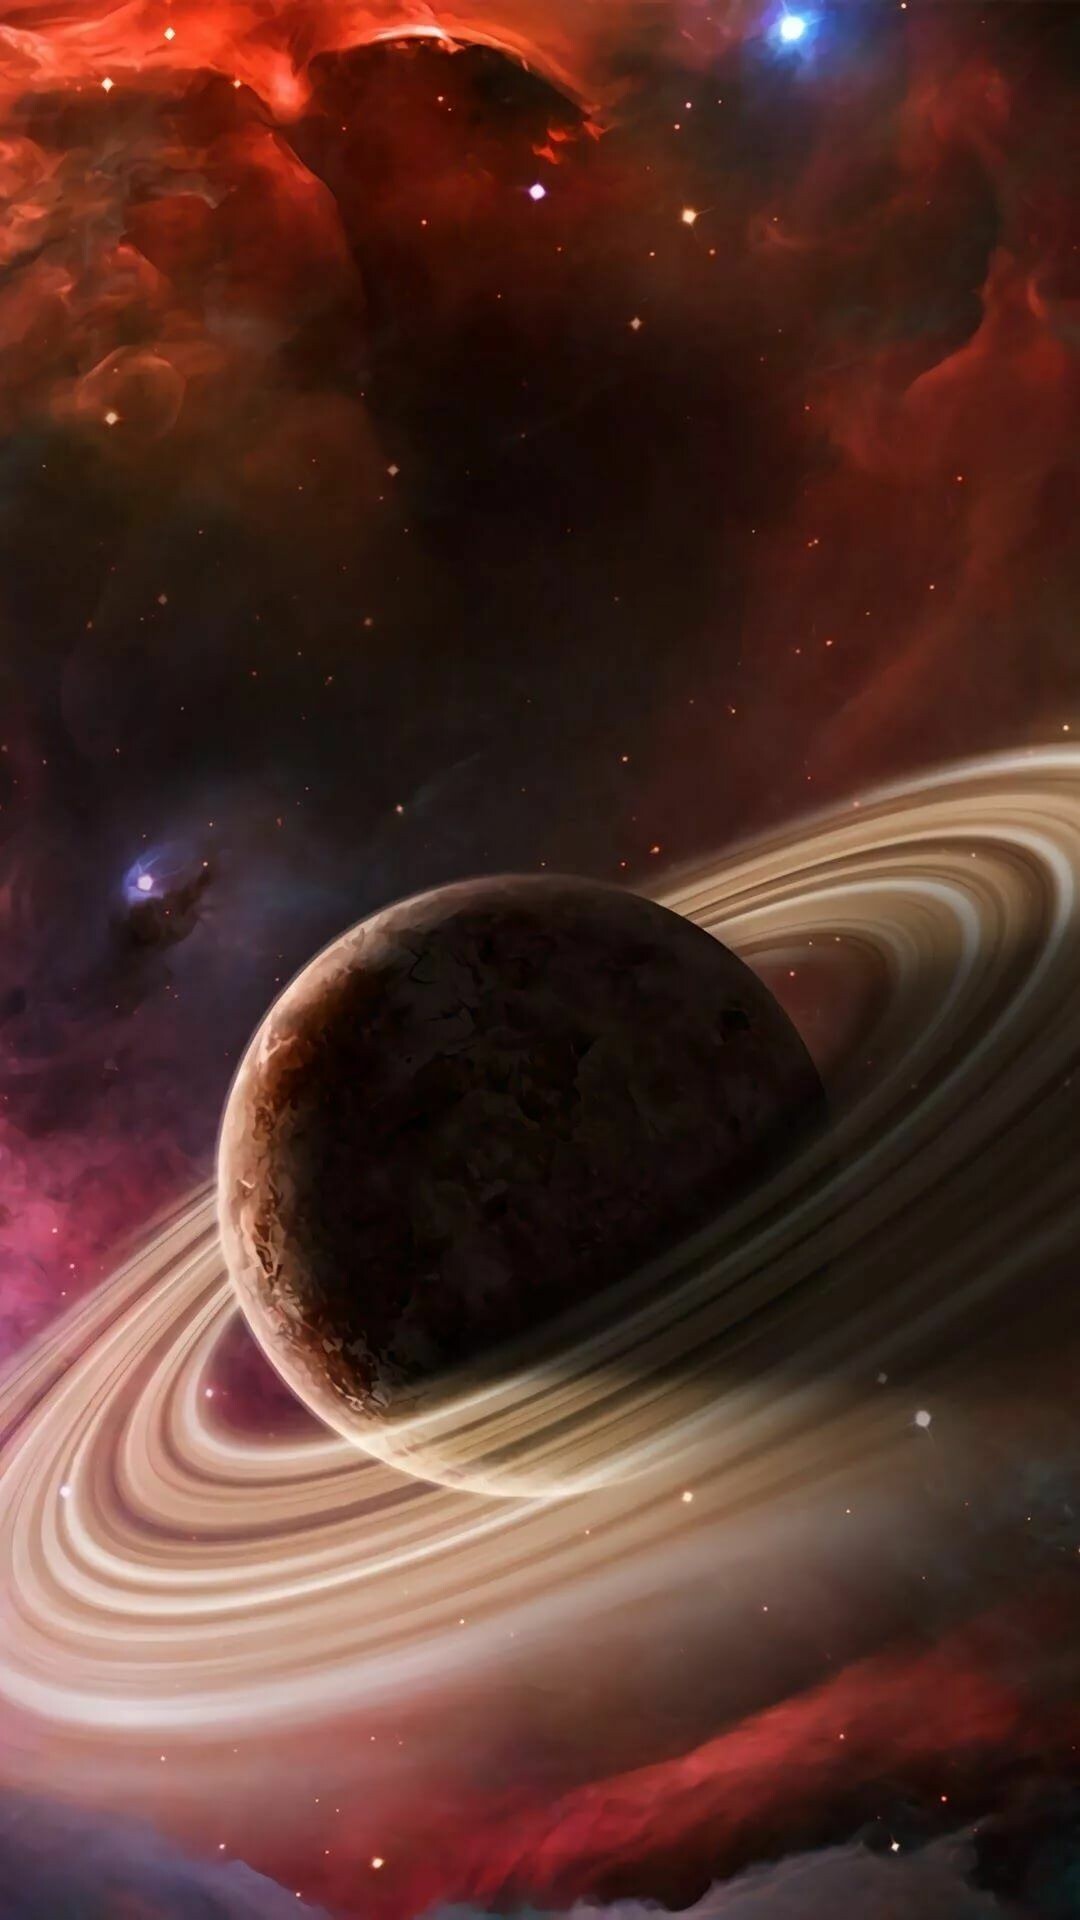 Saturn iPhone wallpapers, Striking visuals, Mobile aesthetic, Celestial beauty, 1080x1920 Full HD Phone